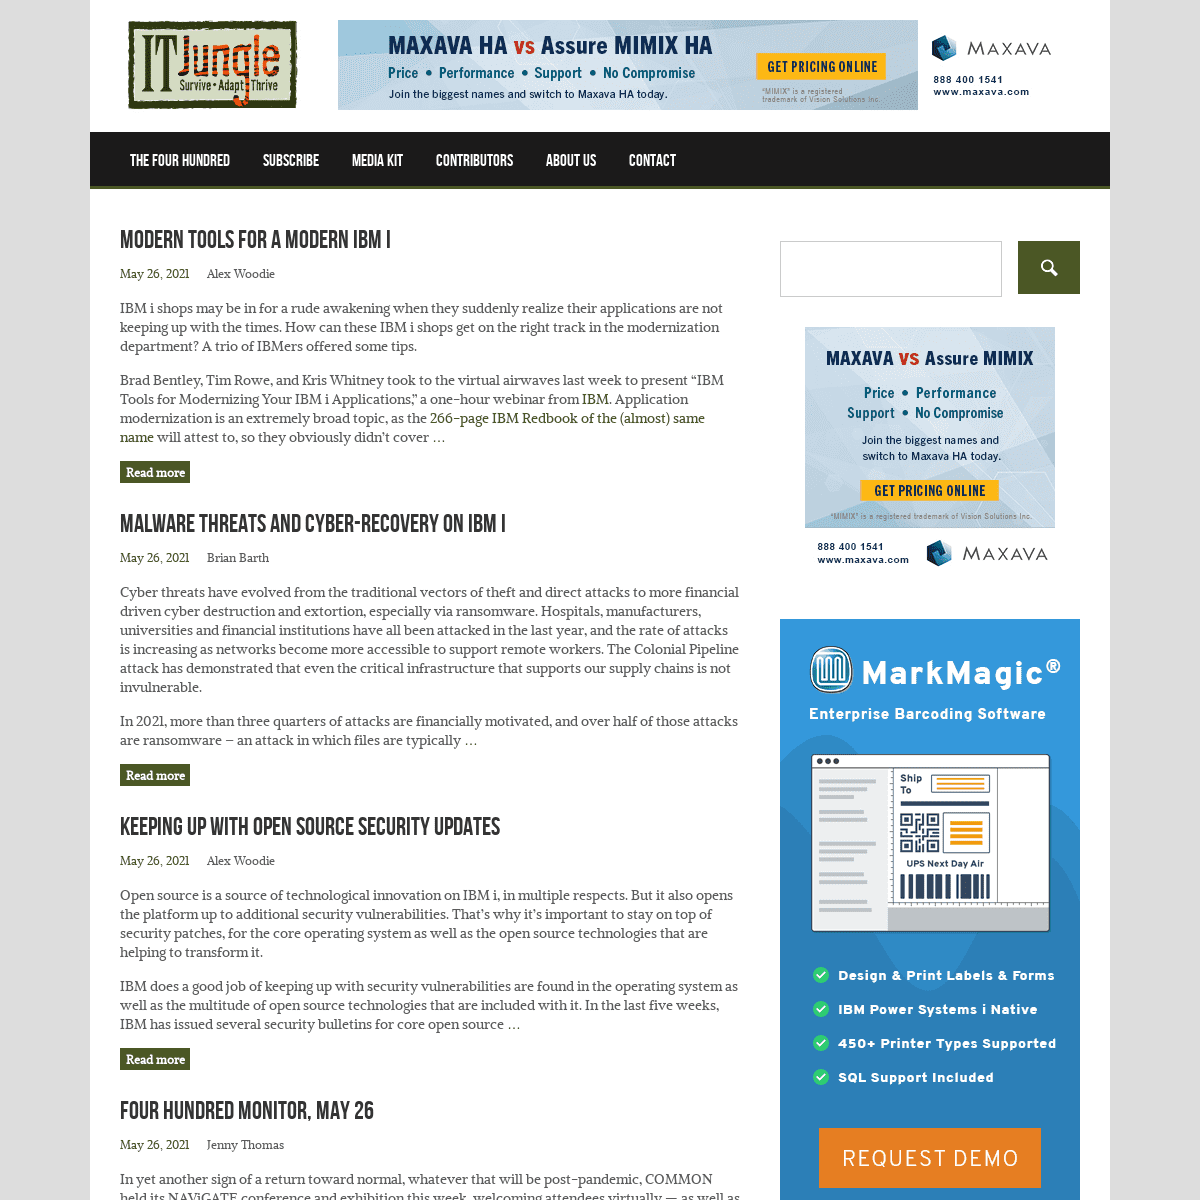 A complete backup of https://itjungle.com